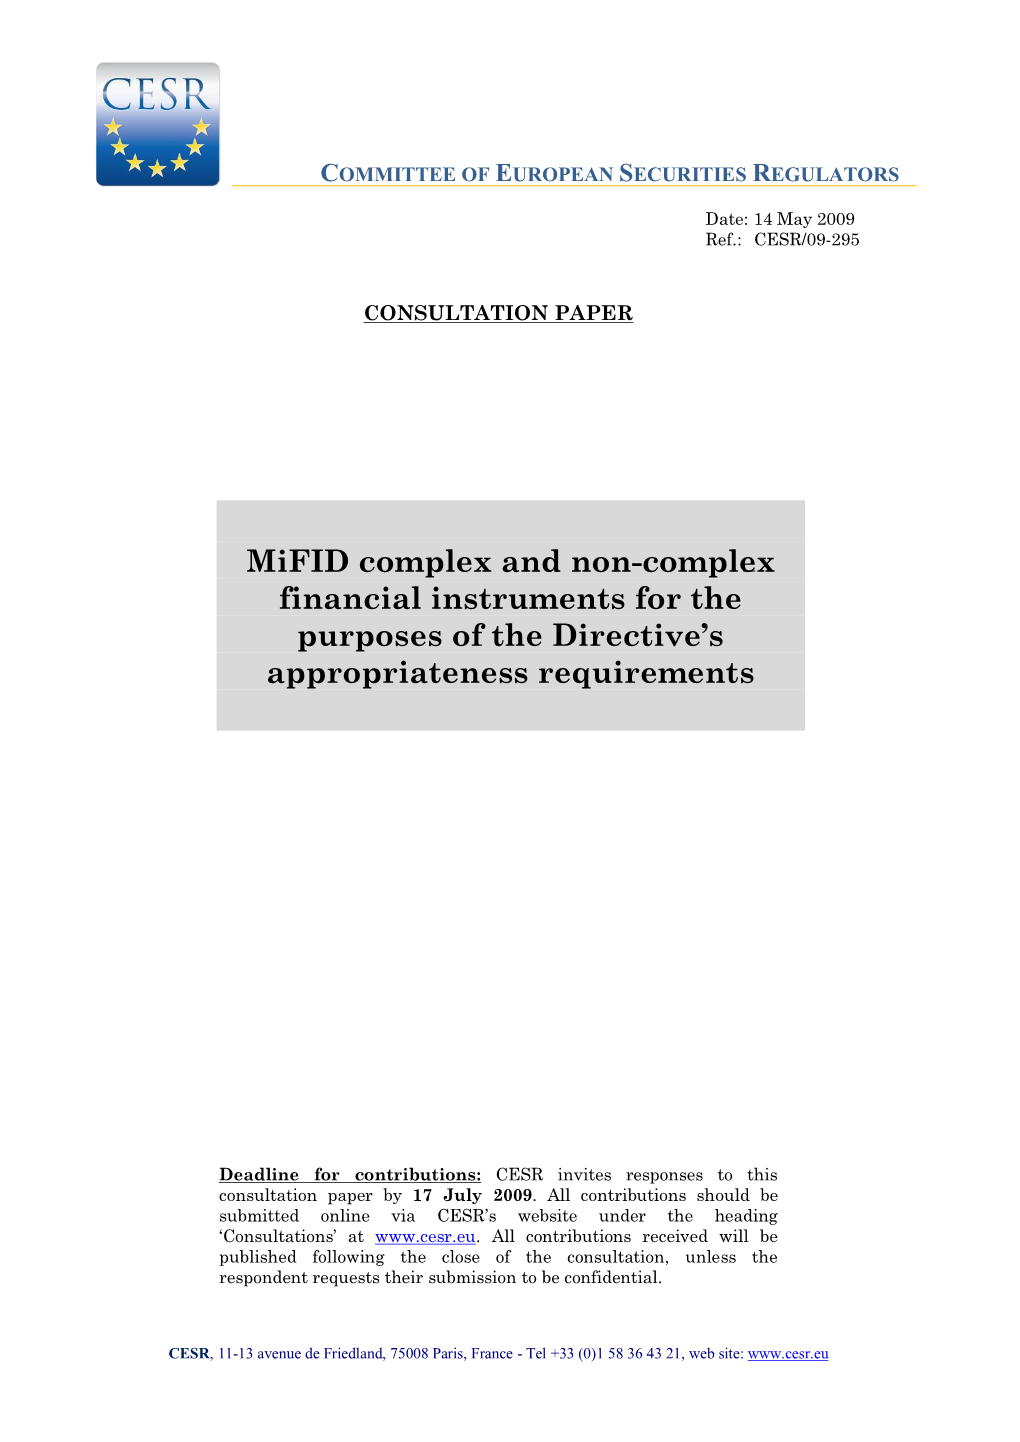 Mifid Complex and Non-Complex Financial Instruments for the Purposes of the Directive‟S Appropriateness Requirements